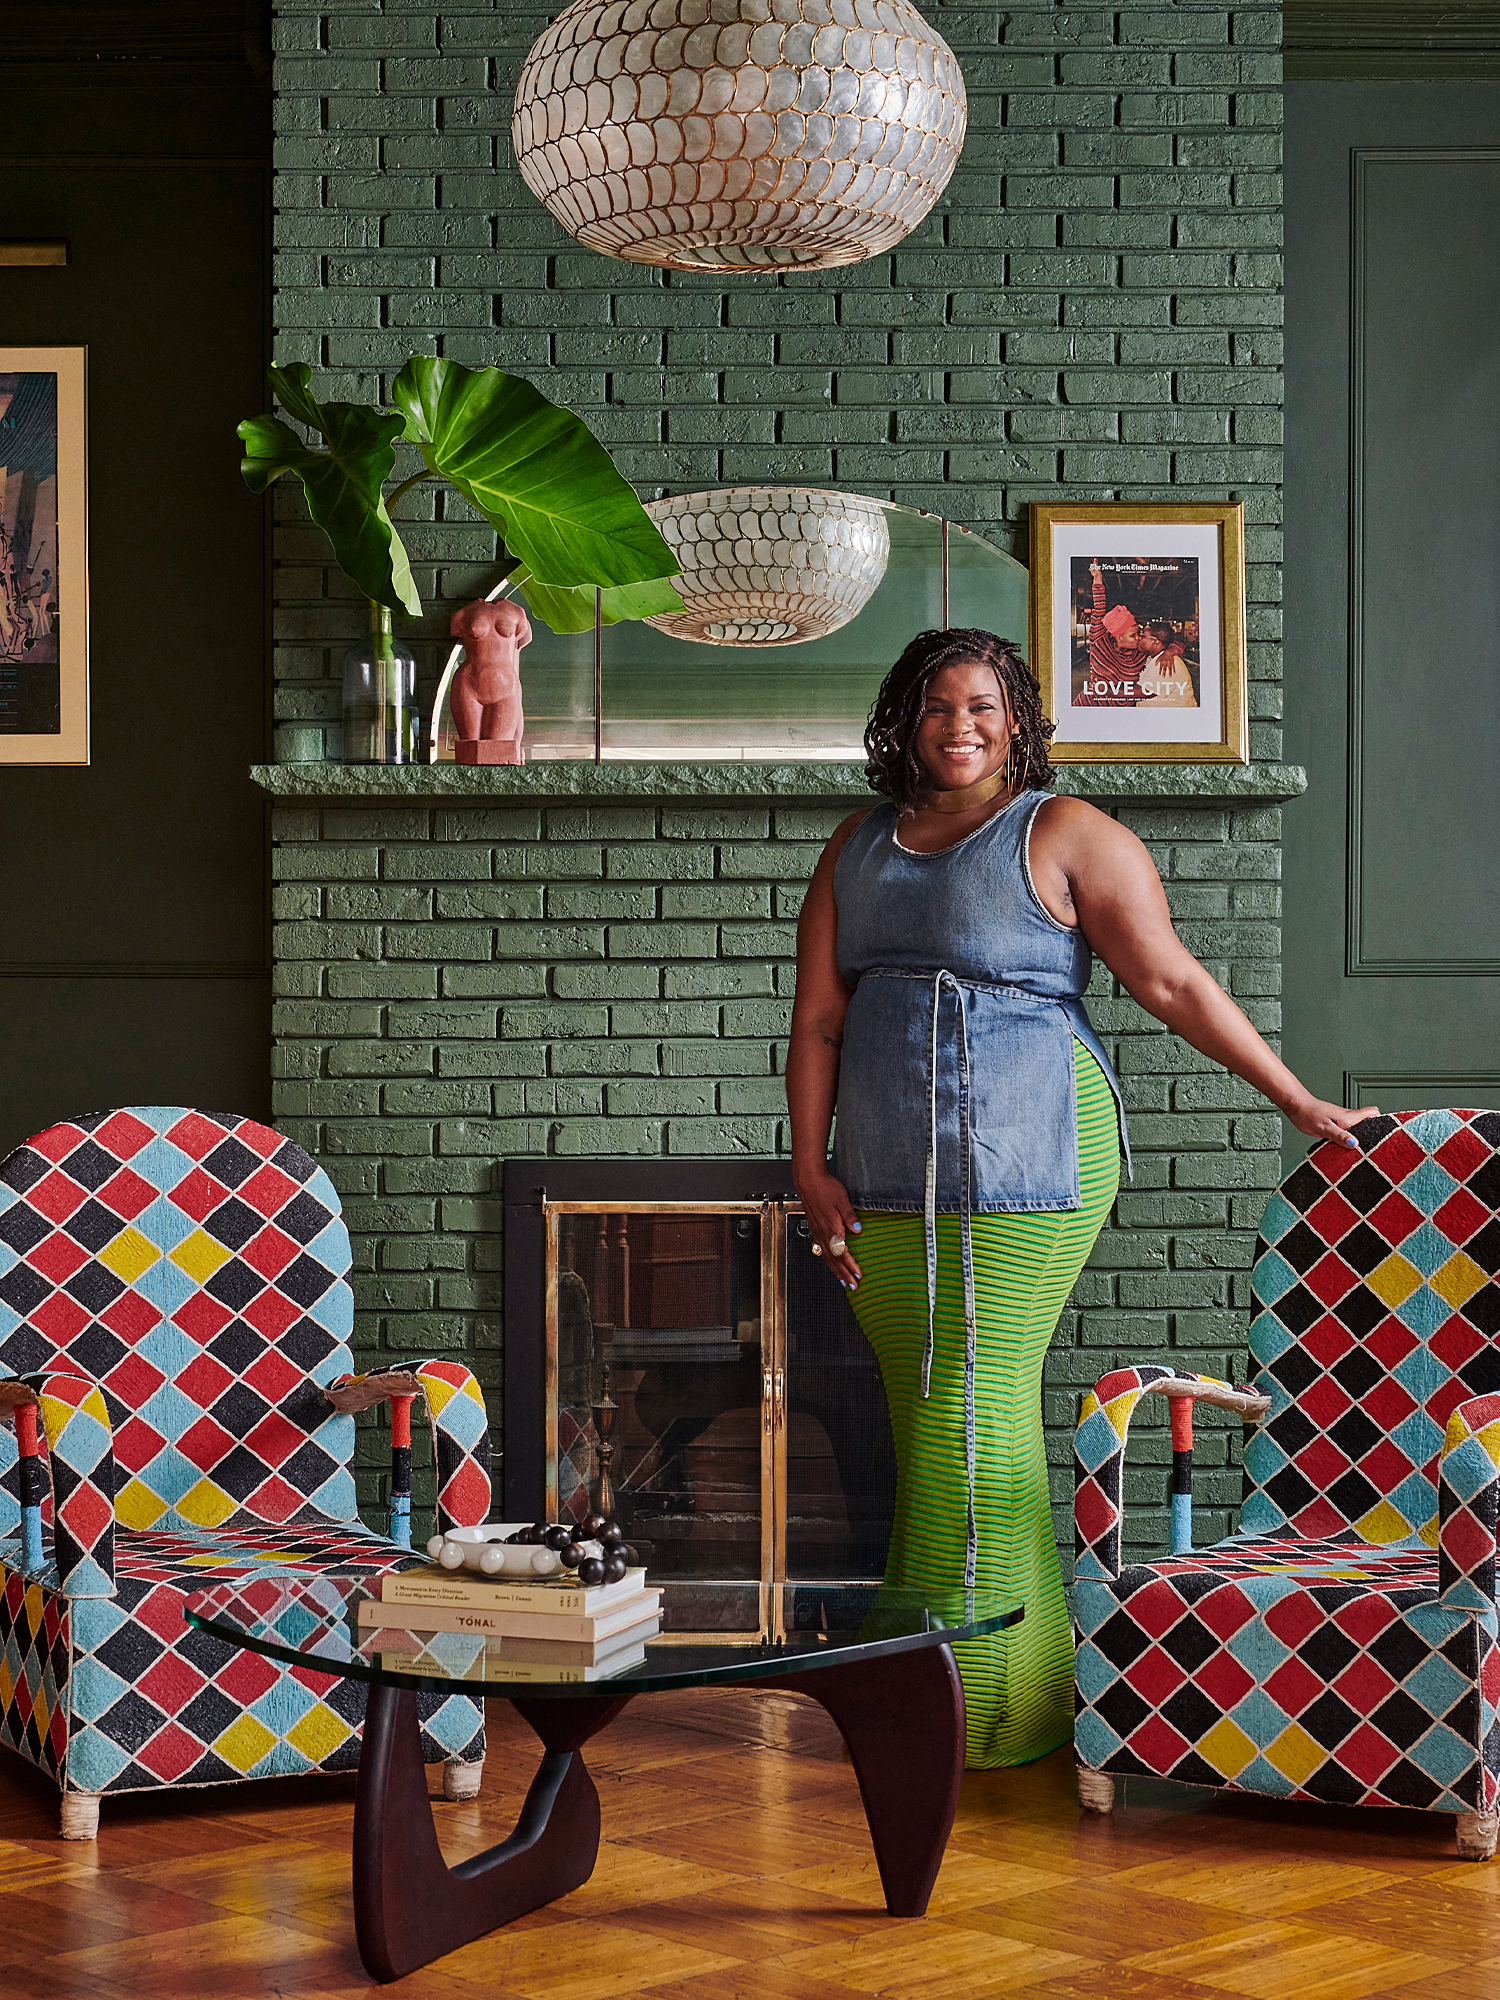 13 Offers and One Reno Later, Sex Educator Ericka Hart’s New Jersey Victorian Is Her Forever Home